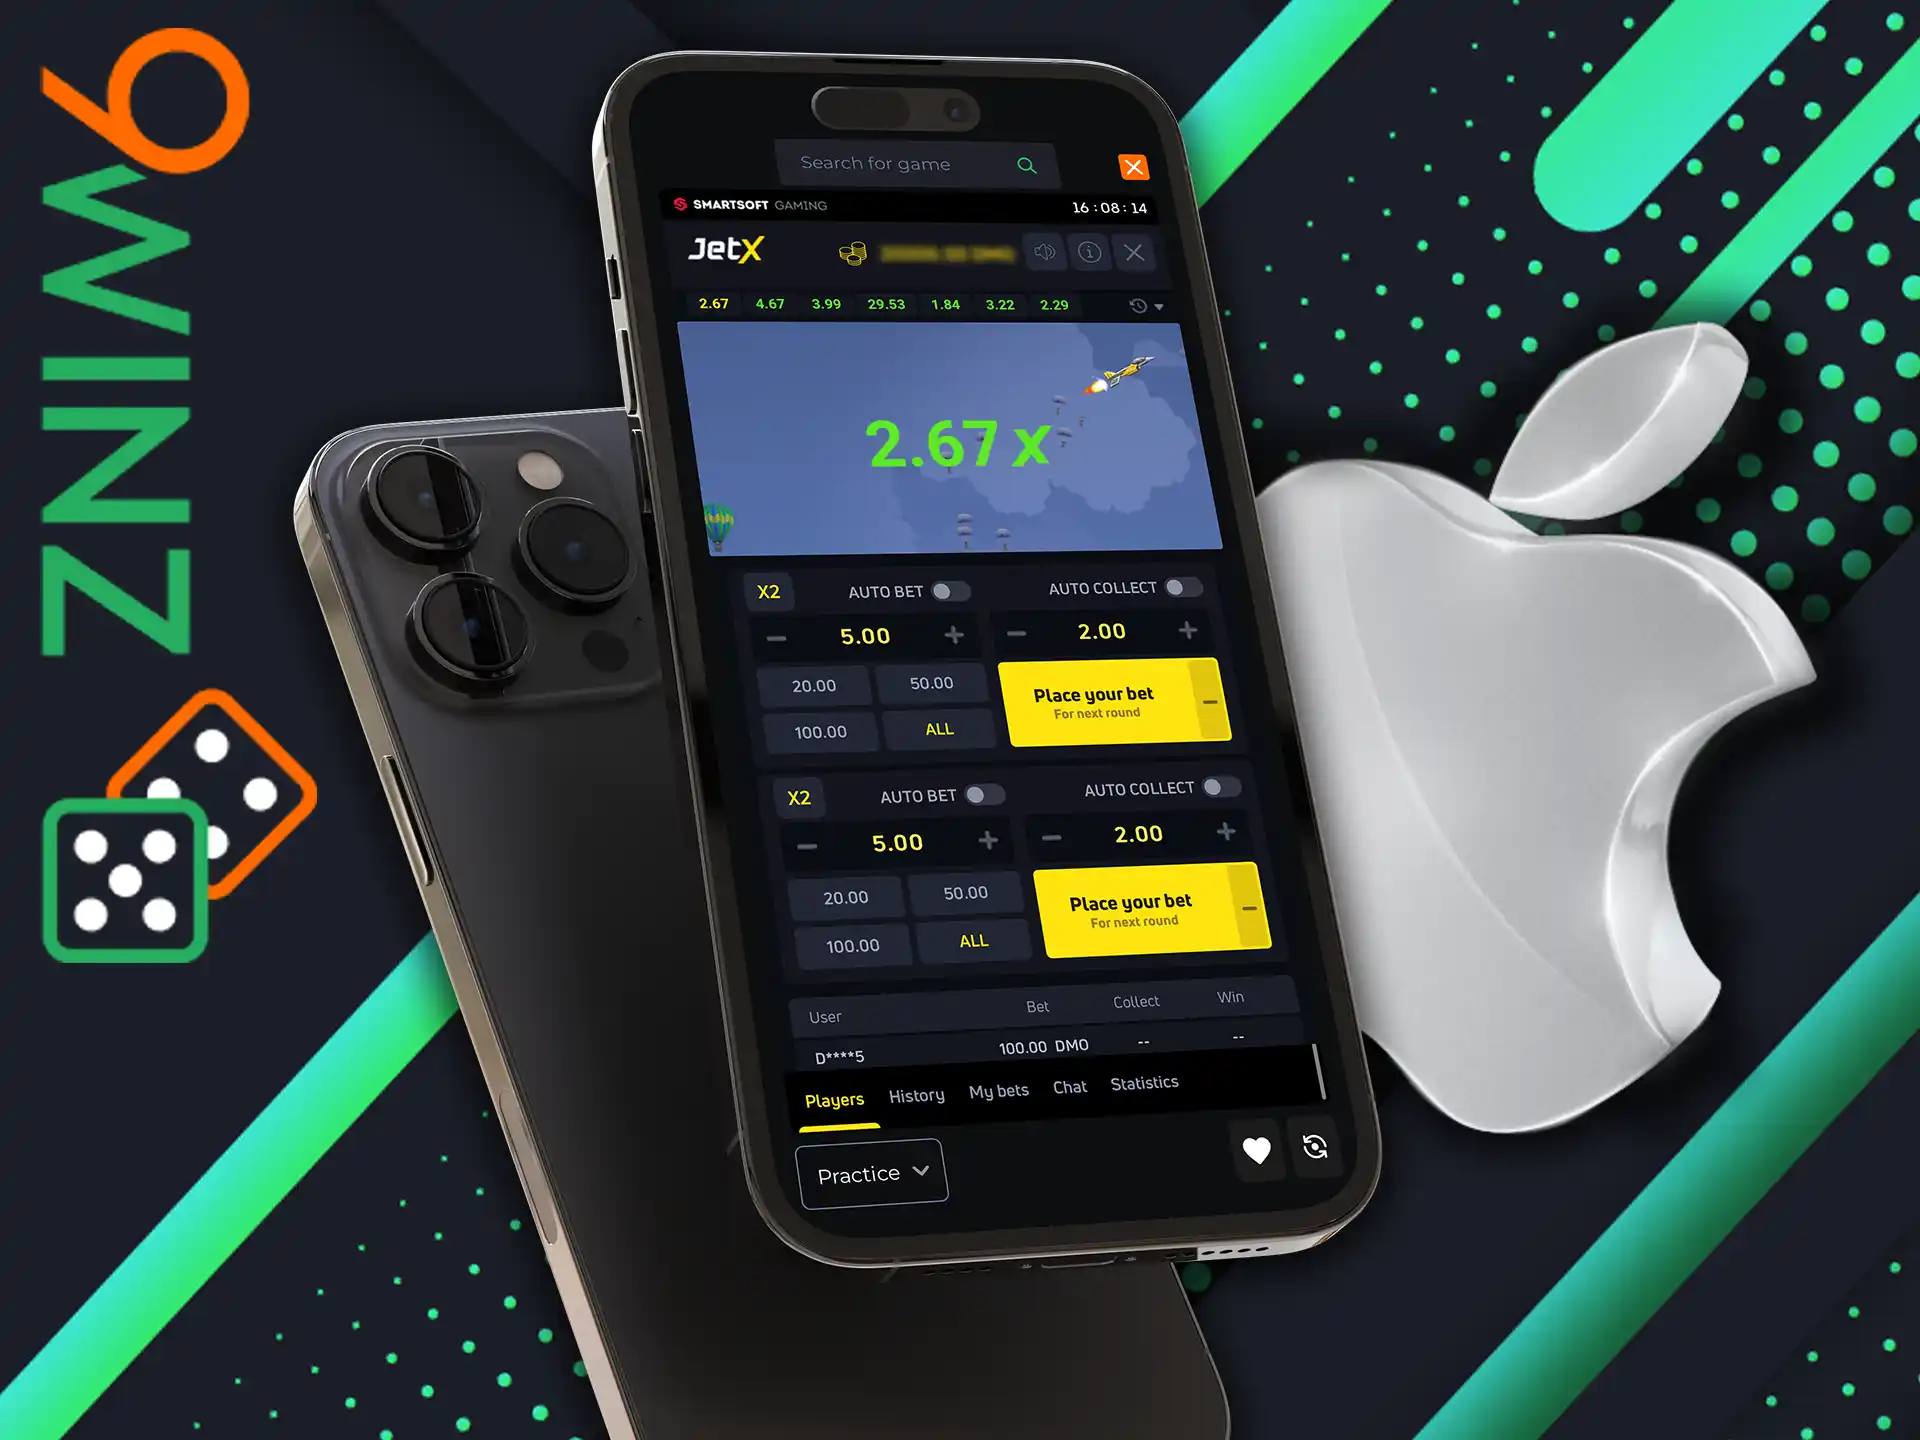 You can download the jetx app for iOS via the 9Winz mobile site using the instructions.